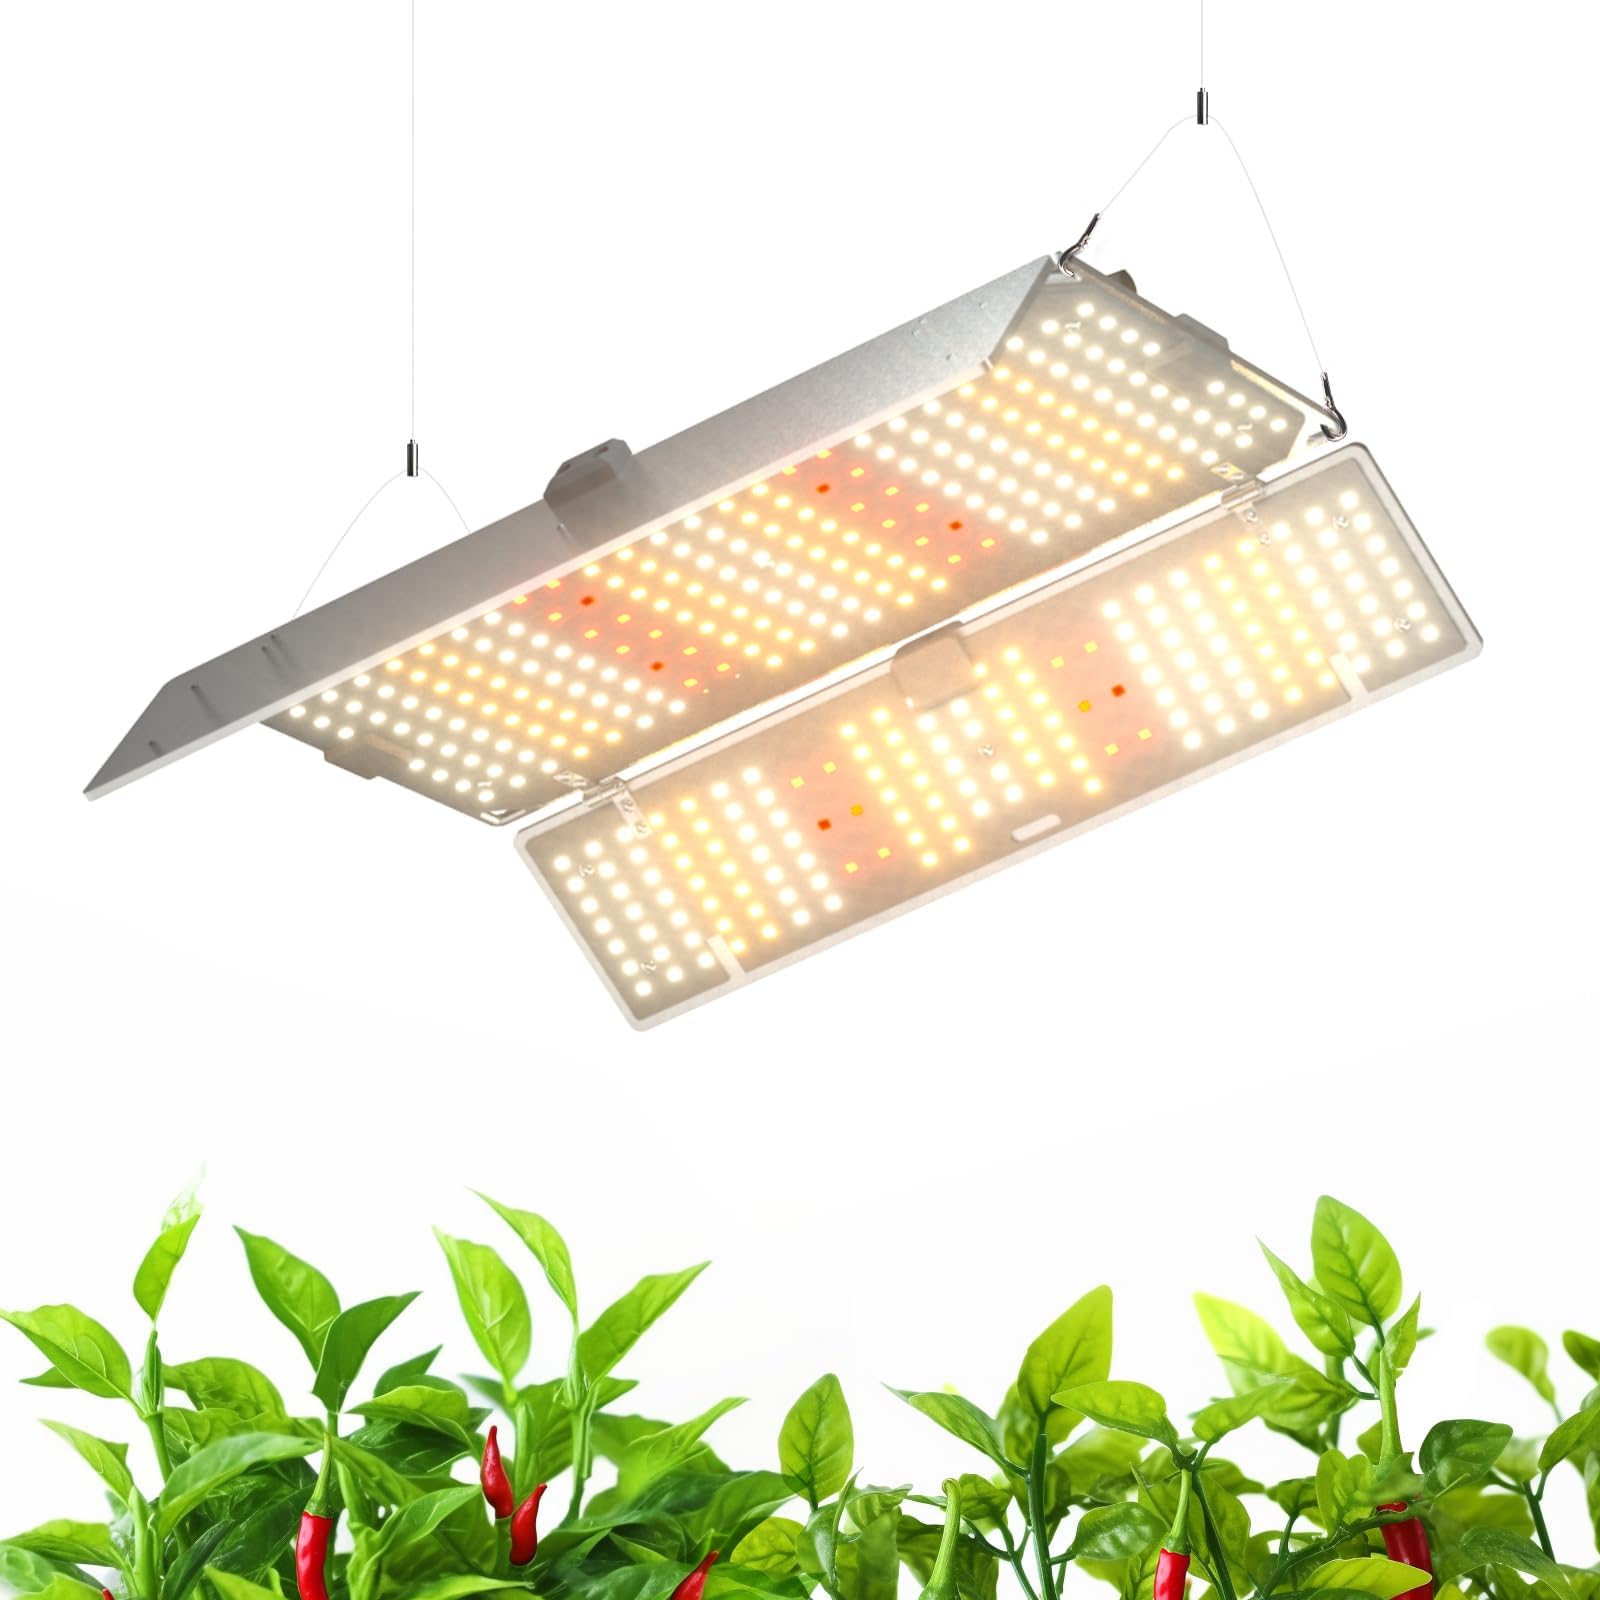 4x4FT LED Grow Light Full Spectrum with IR 200W 816 LEDs (1 Pack) DC200(M)